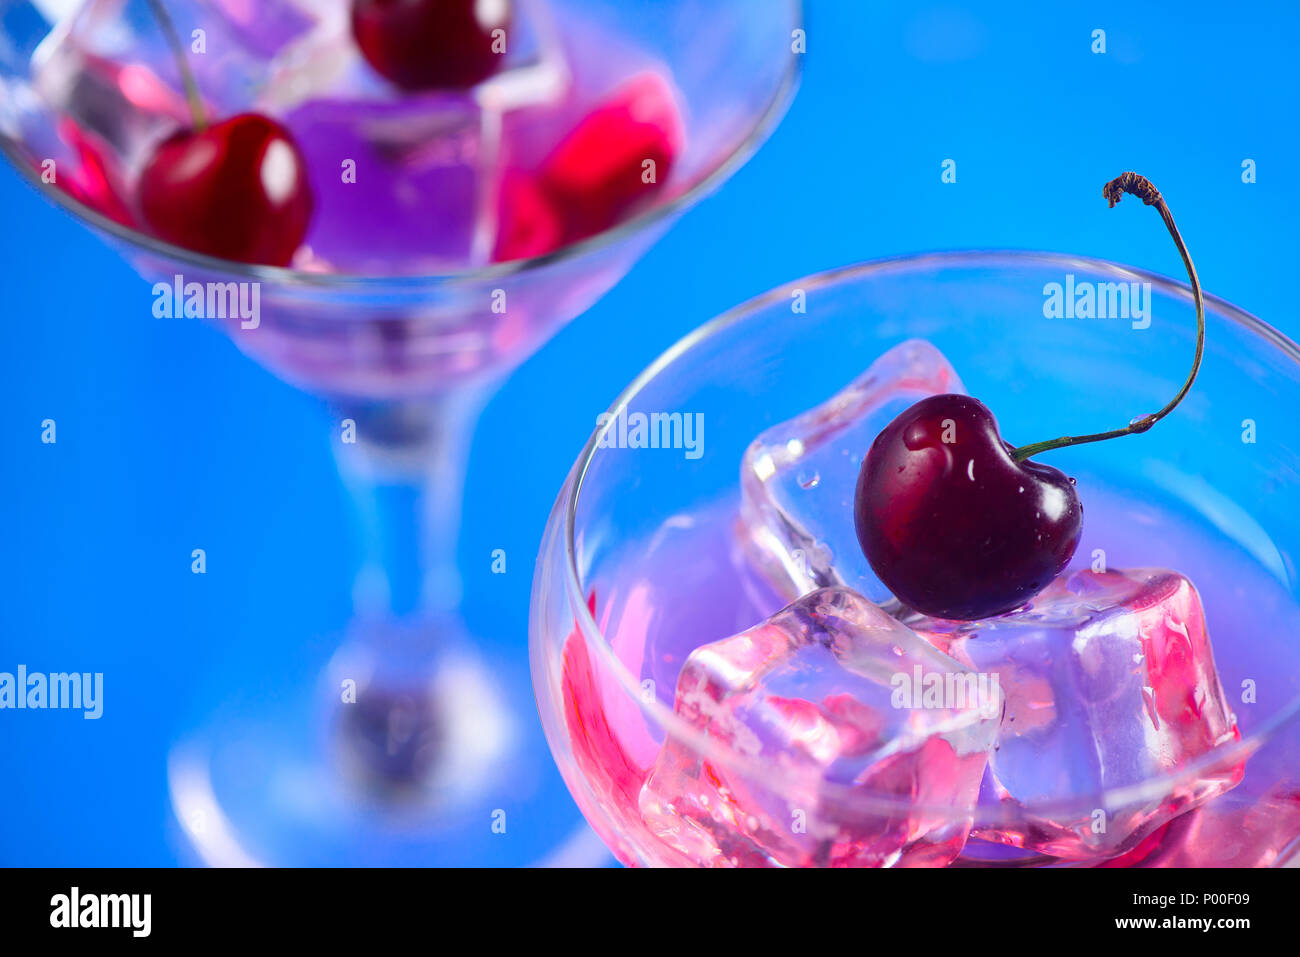 Cherry cocktail close-up. Martini glass with ice cubes and cherries on a bright blue background with copy space. Hot summer day refreshment concept Stock Photo